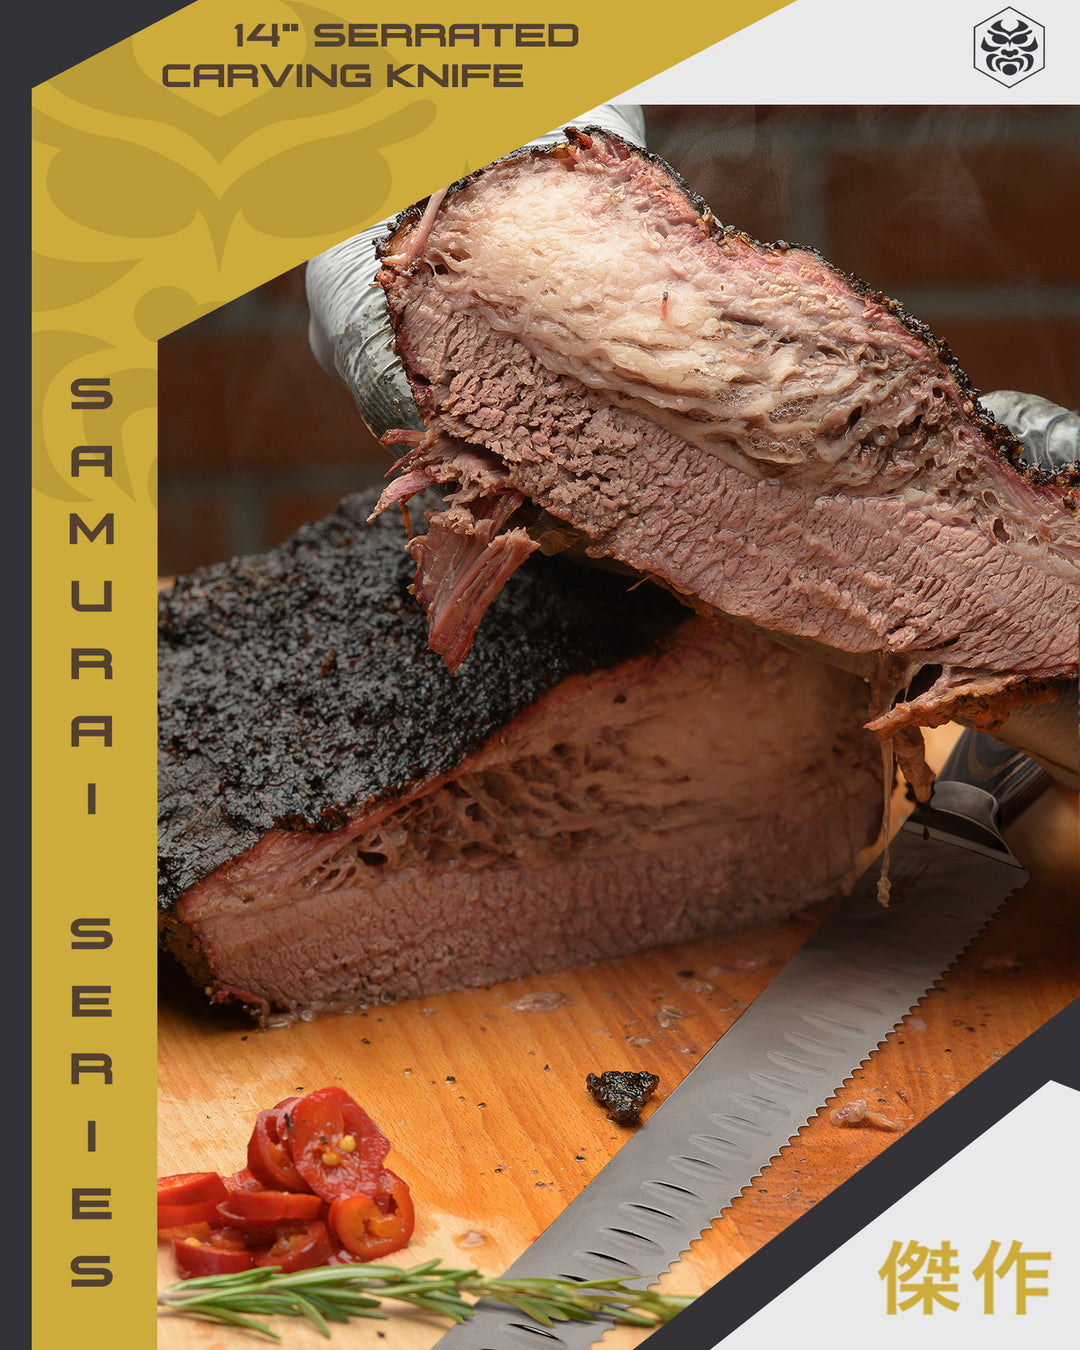 A pitmaster shows off a brisket sliced with the serrated carving knife